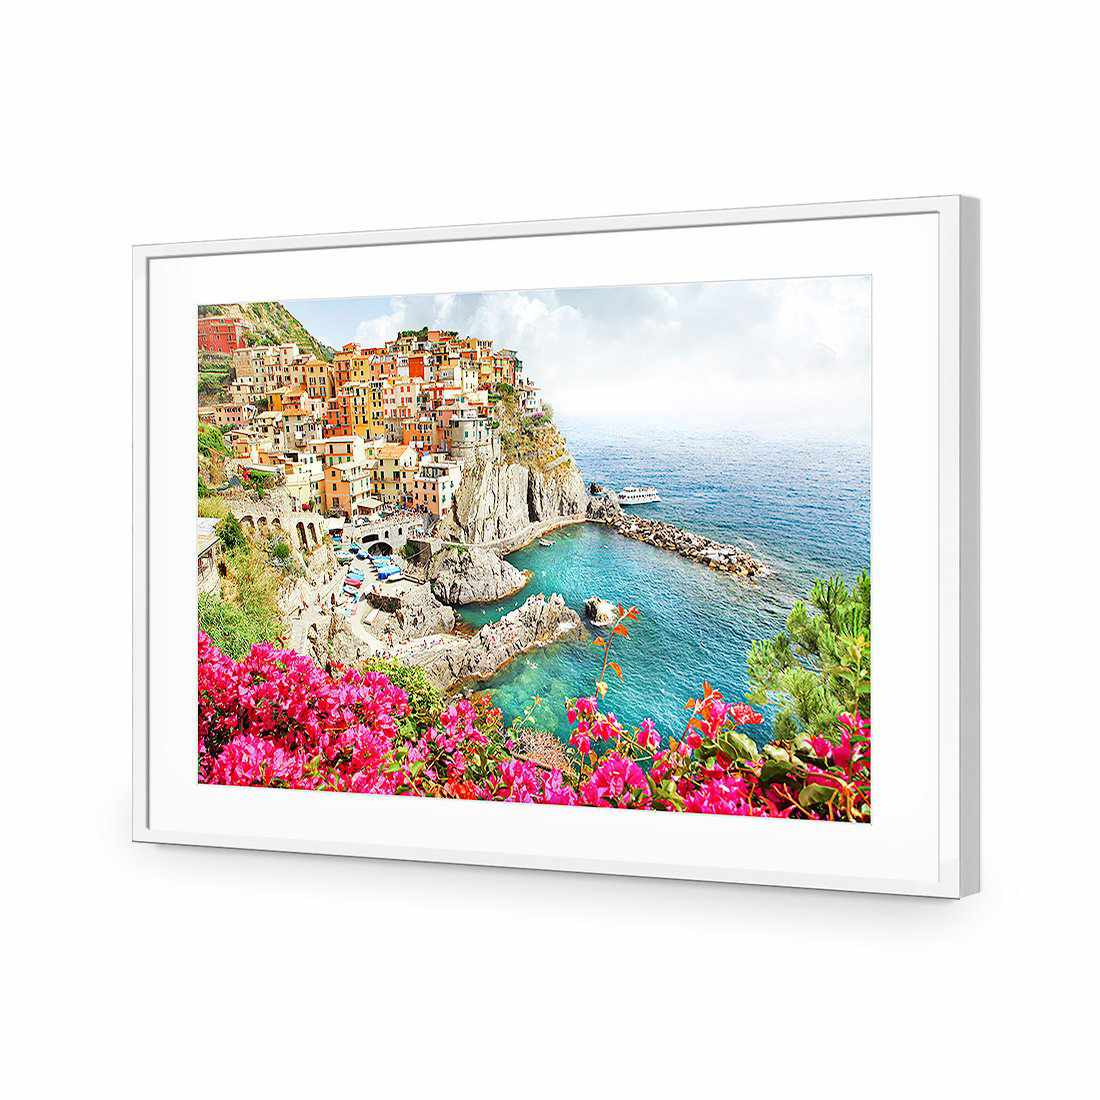 Cinque Terre in Italy-Acrylic-Wall Art Design-With Border-Acrylic - White Frame-45x30cm-Wall Art Designs